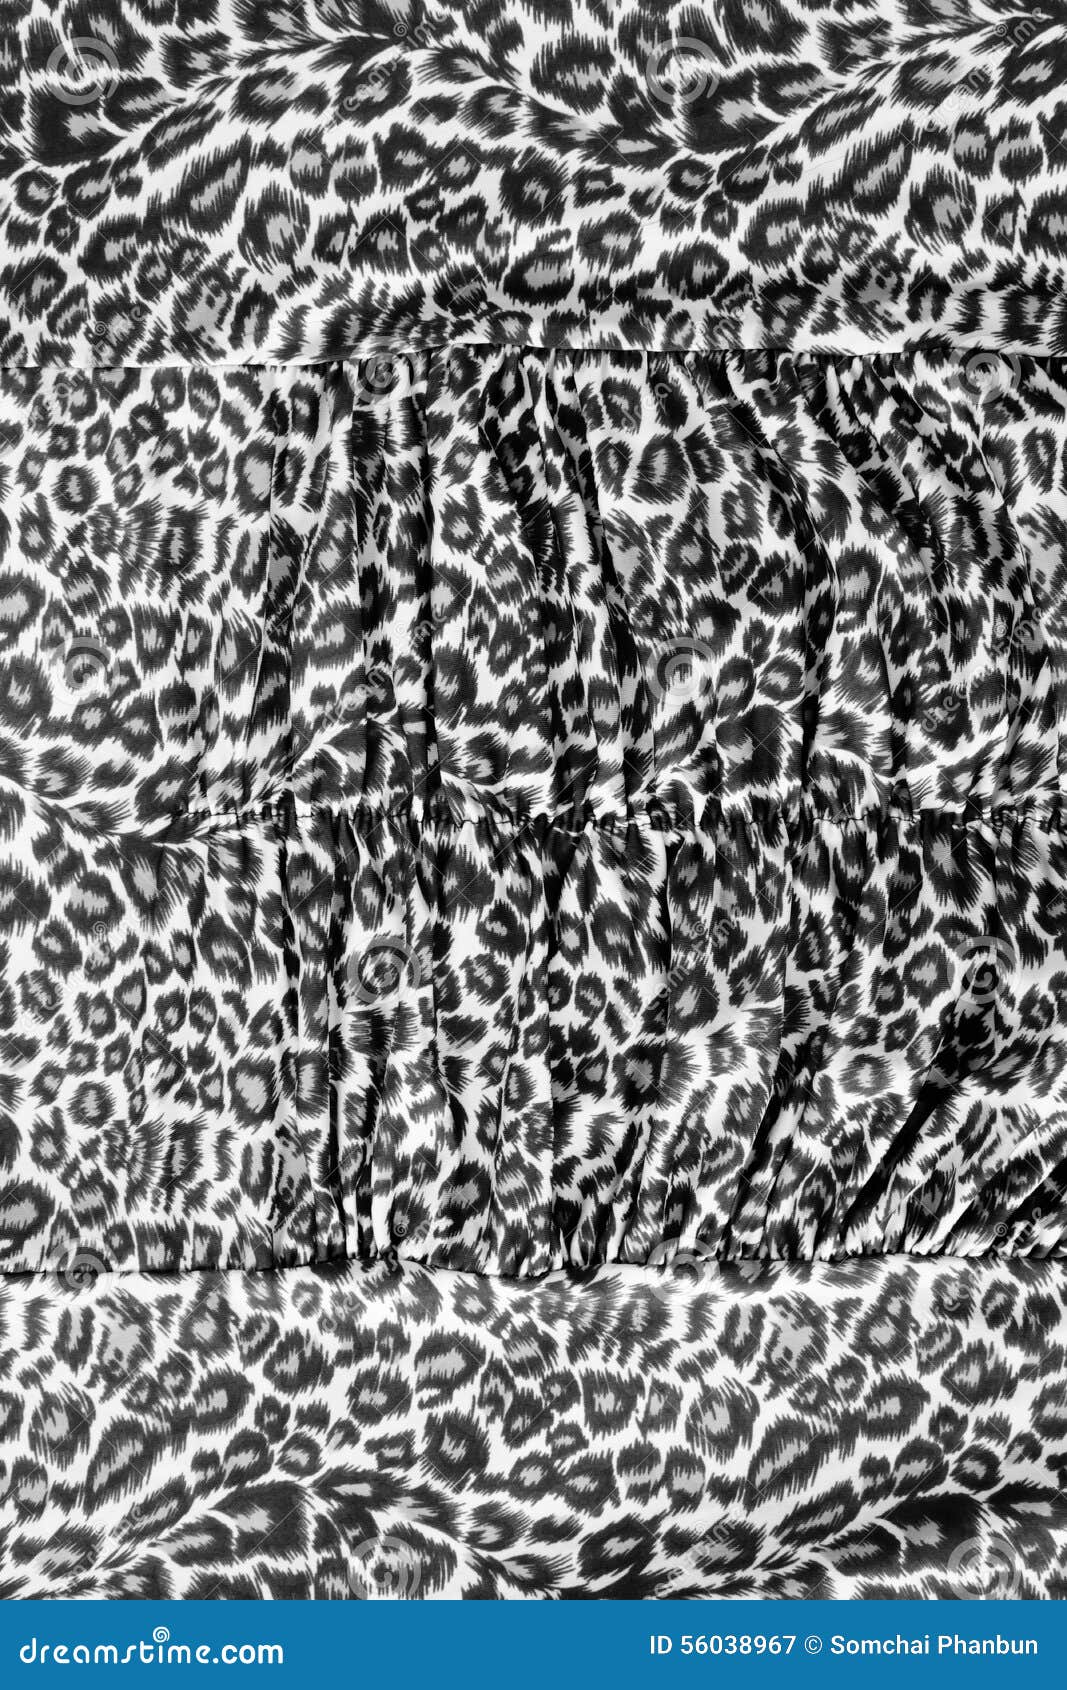 Tiger Textile Pieces of Clothing Black and White Stock Image - Image of ...